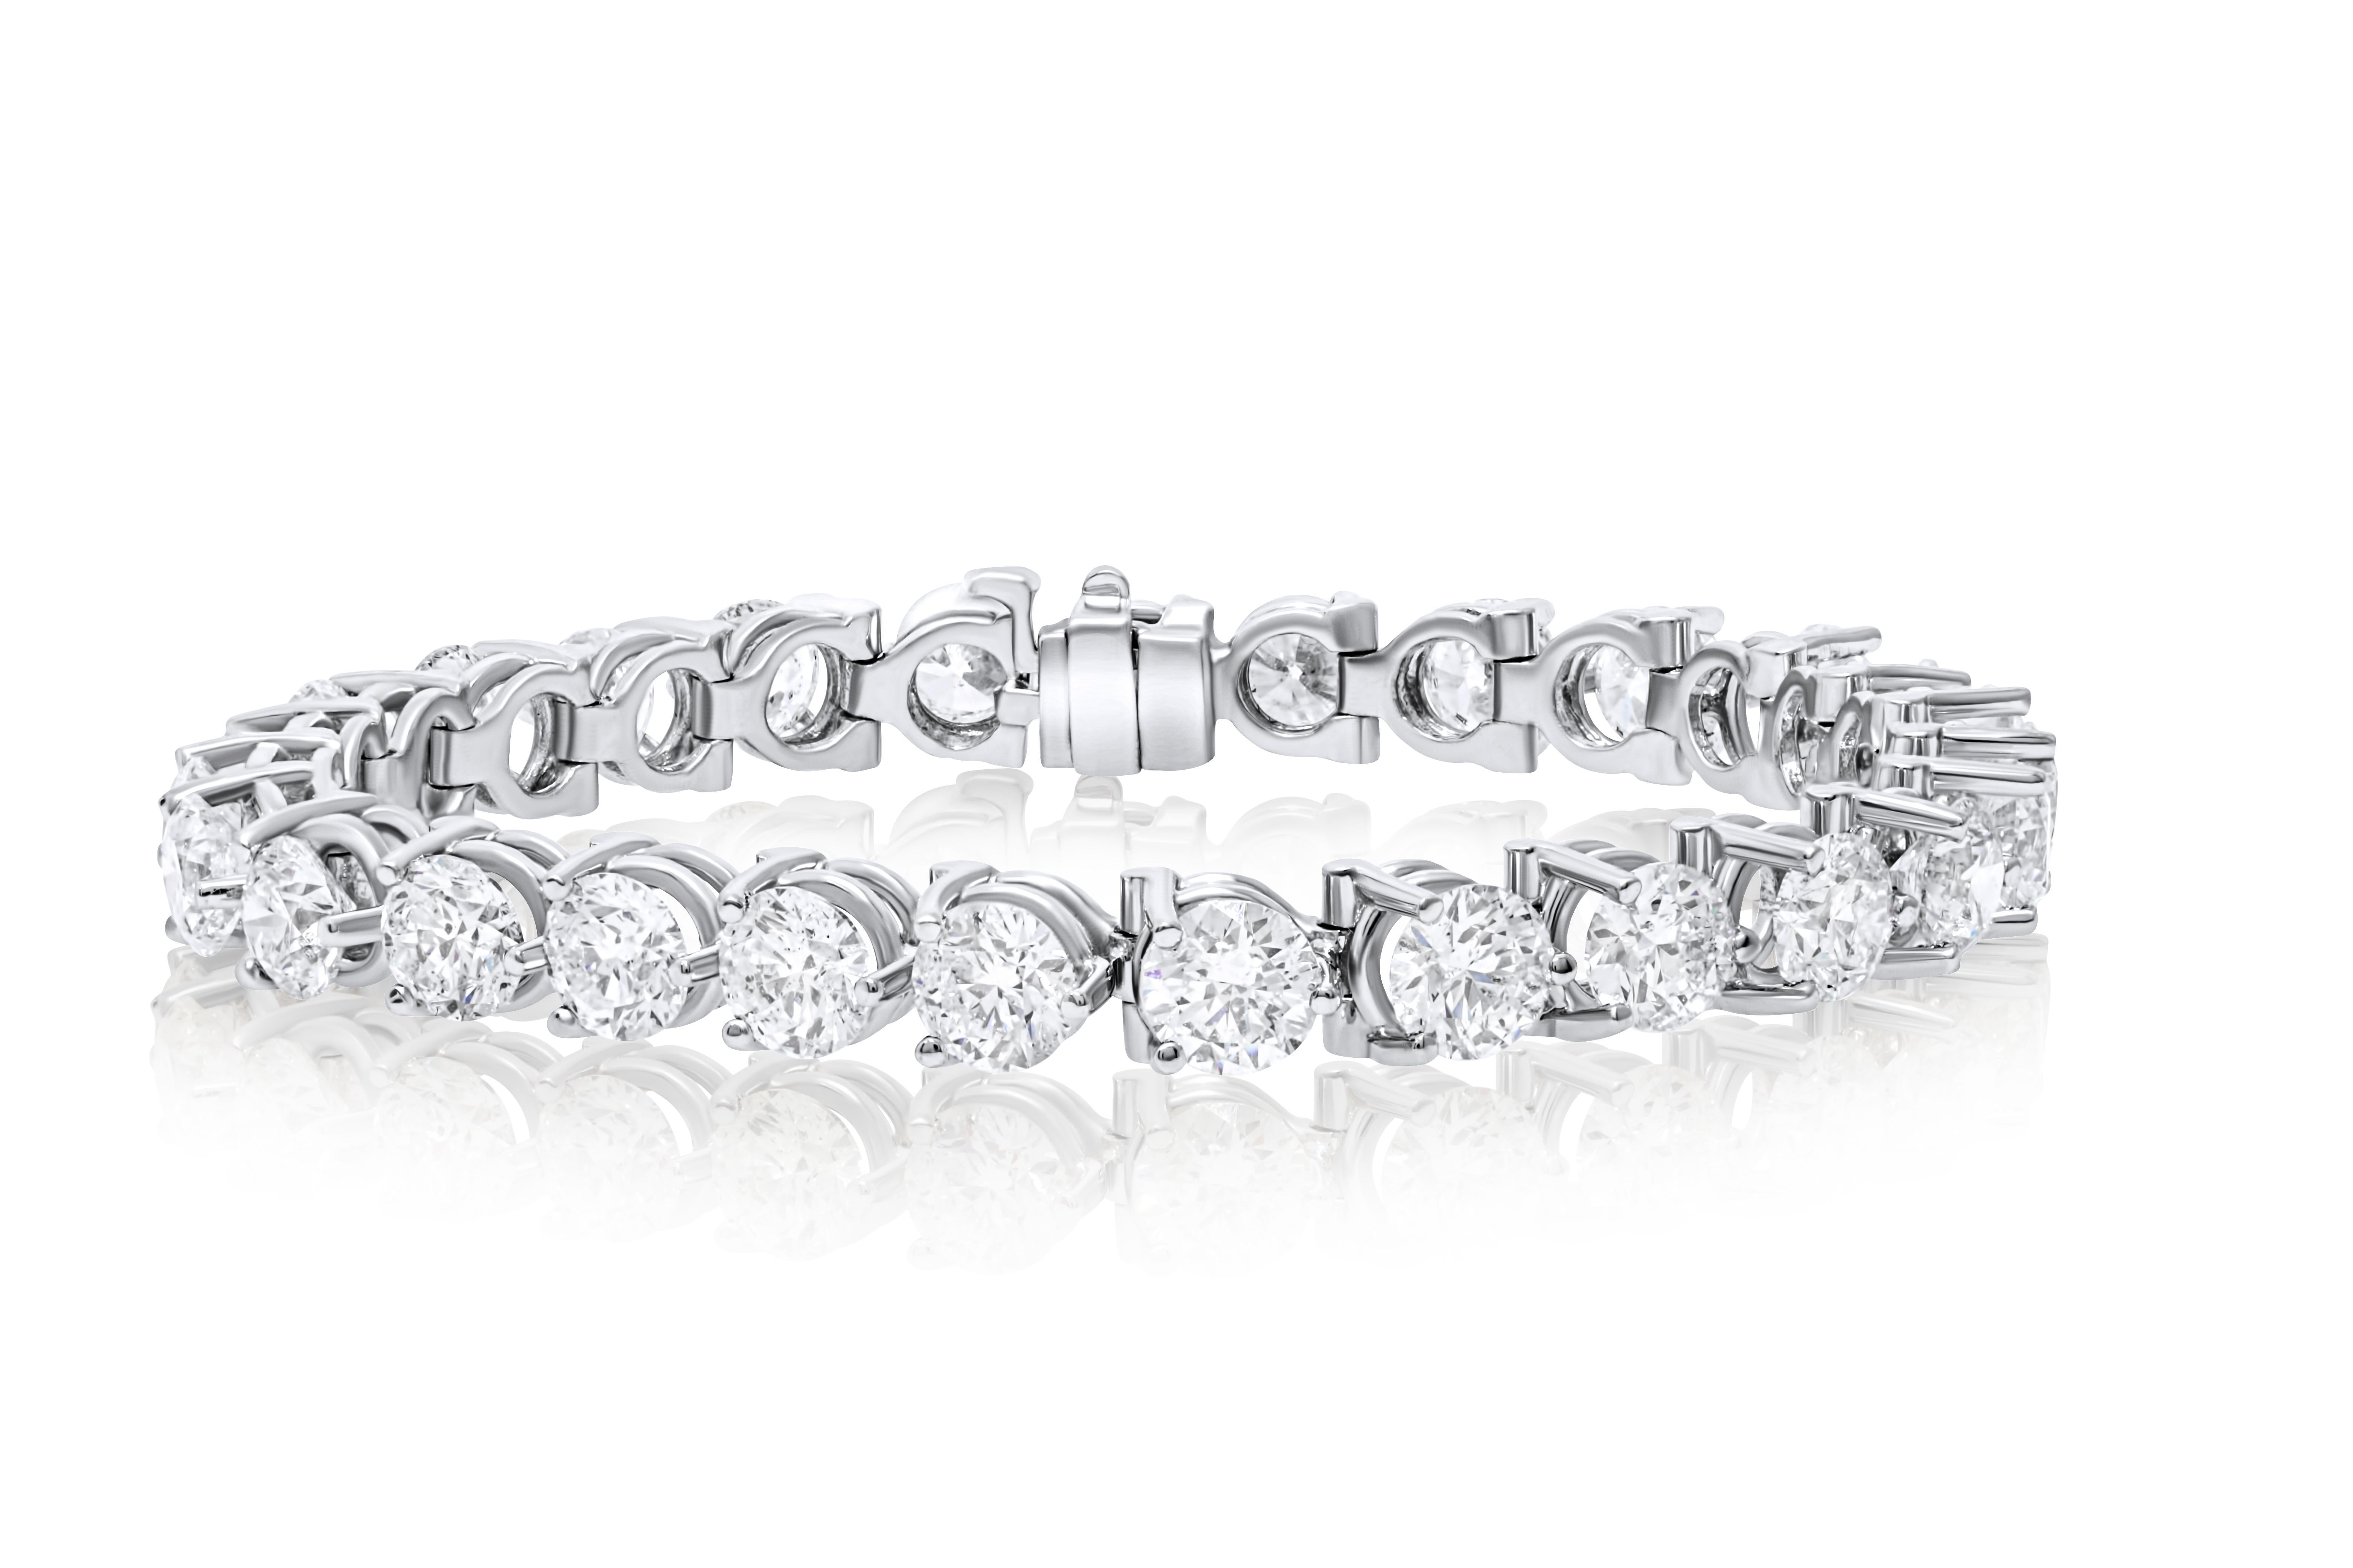 18 kt white gold 3 prong diamond tennis bracelet adorned with 13.00 cts tw of round diamonds (33 stones)
Diana M. is a leading supplier of top-quality fine jewelry for over 35 years.
Diana M is one-stop shop for all your jewelry shopping, carrying